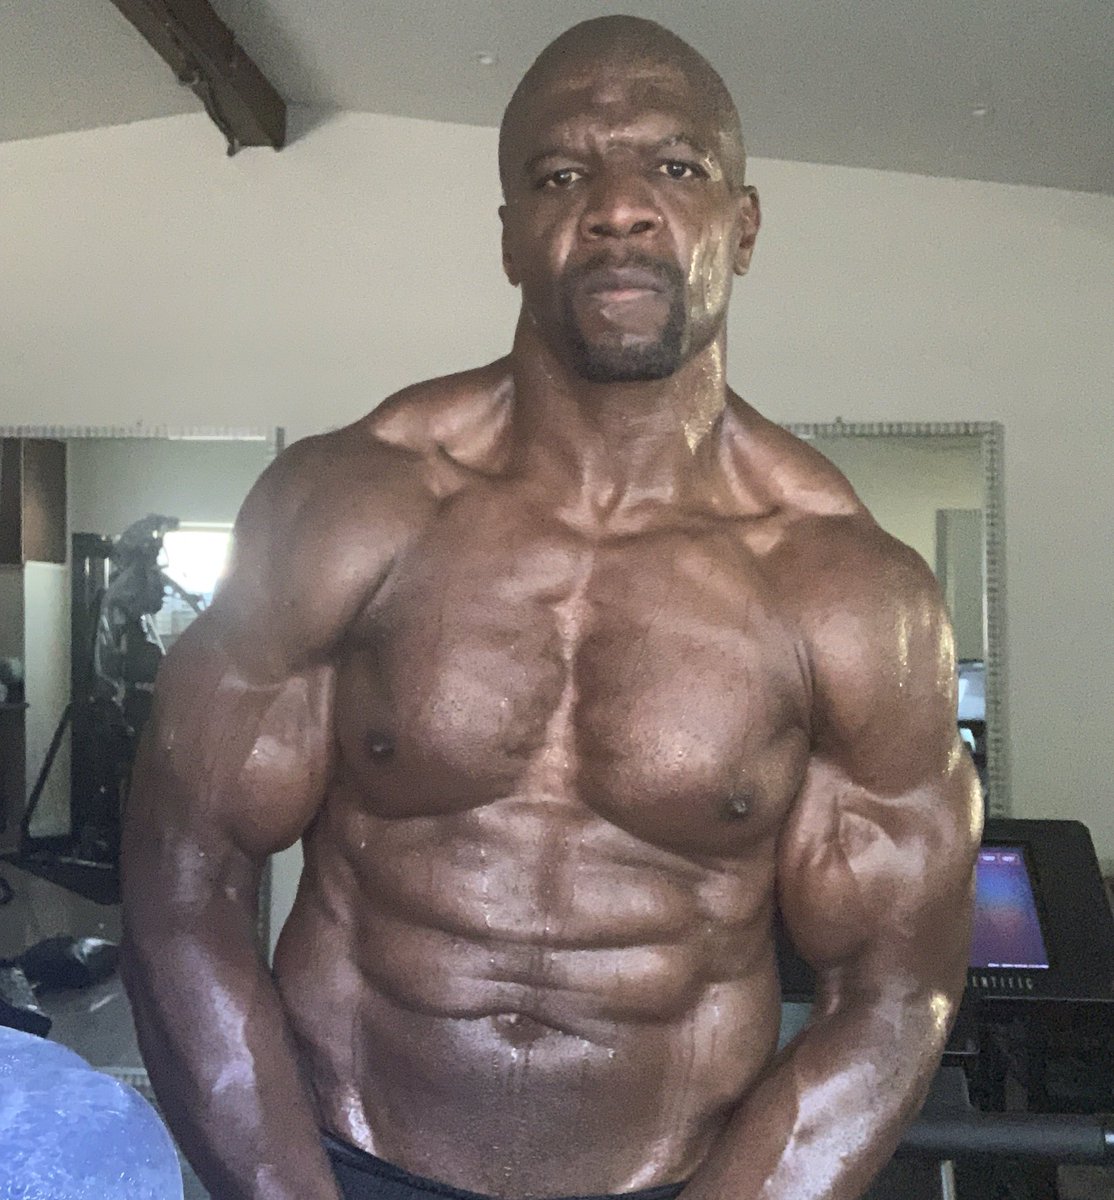 terry crews on Twitter: "Pre-@AGT PUMP SO I CAN POP THESE 51 YEAR OLD PECS!  💪🏾🤣💪🏾 IF YOU AIN'T SWEATIN, YOU AIN'T LIFTIN!… "